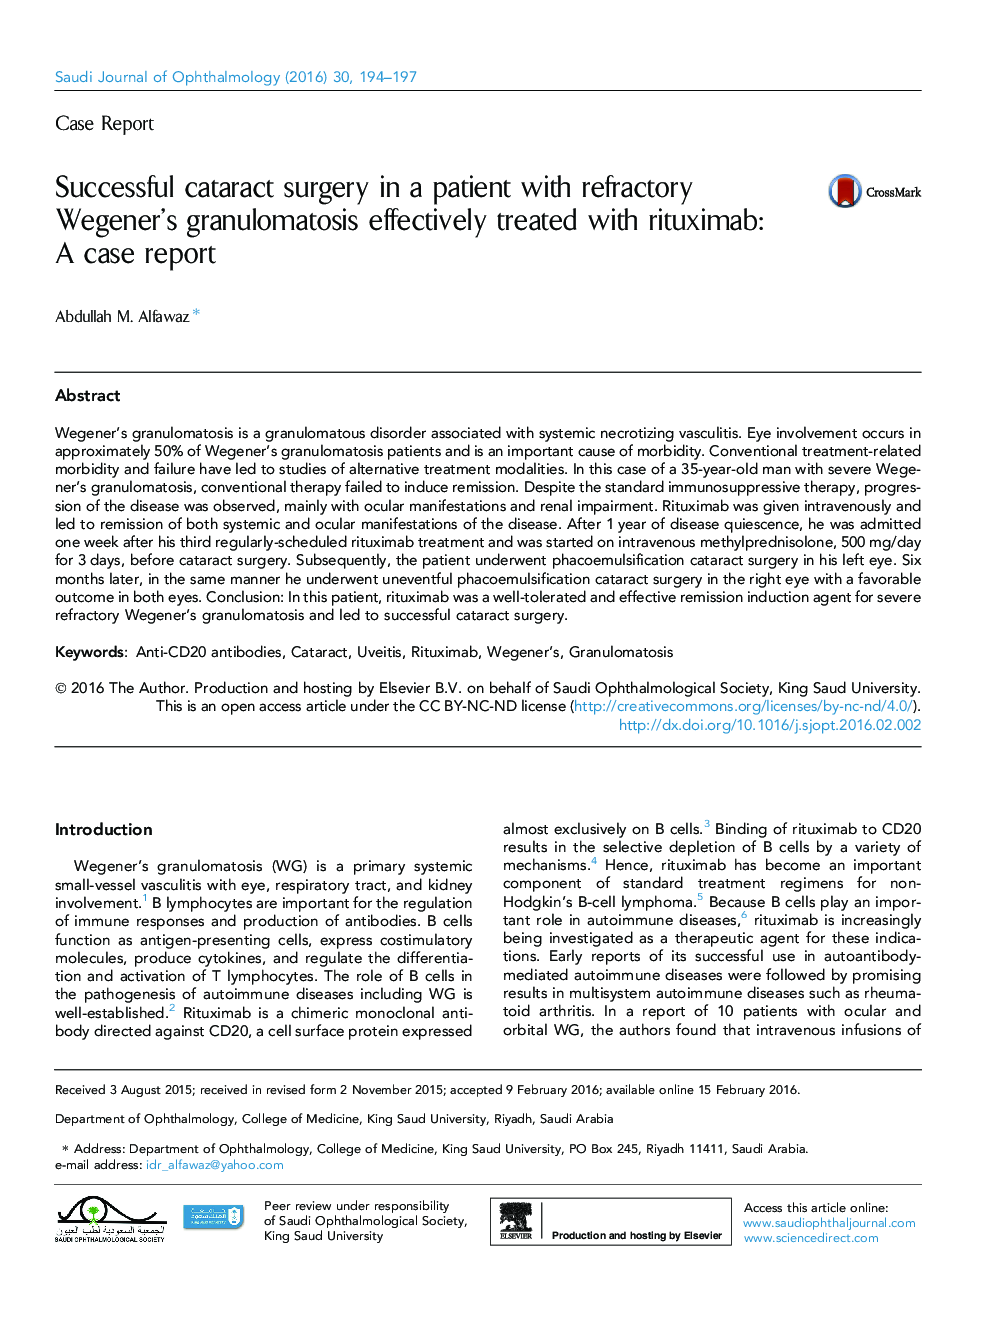 Successful cataract surgery in a patient with refractory Wegener’s granulomatosis effectively treated with rituximab: A case report 